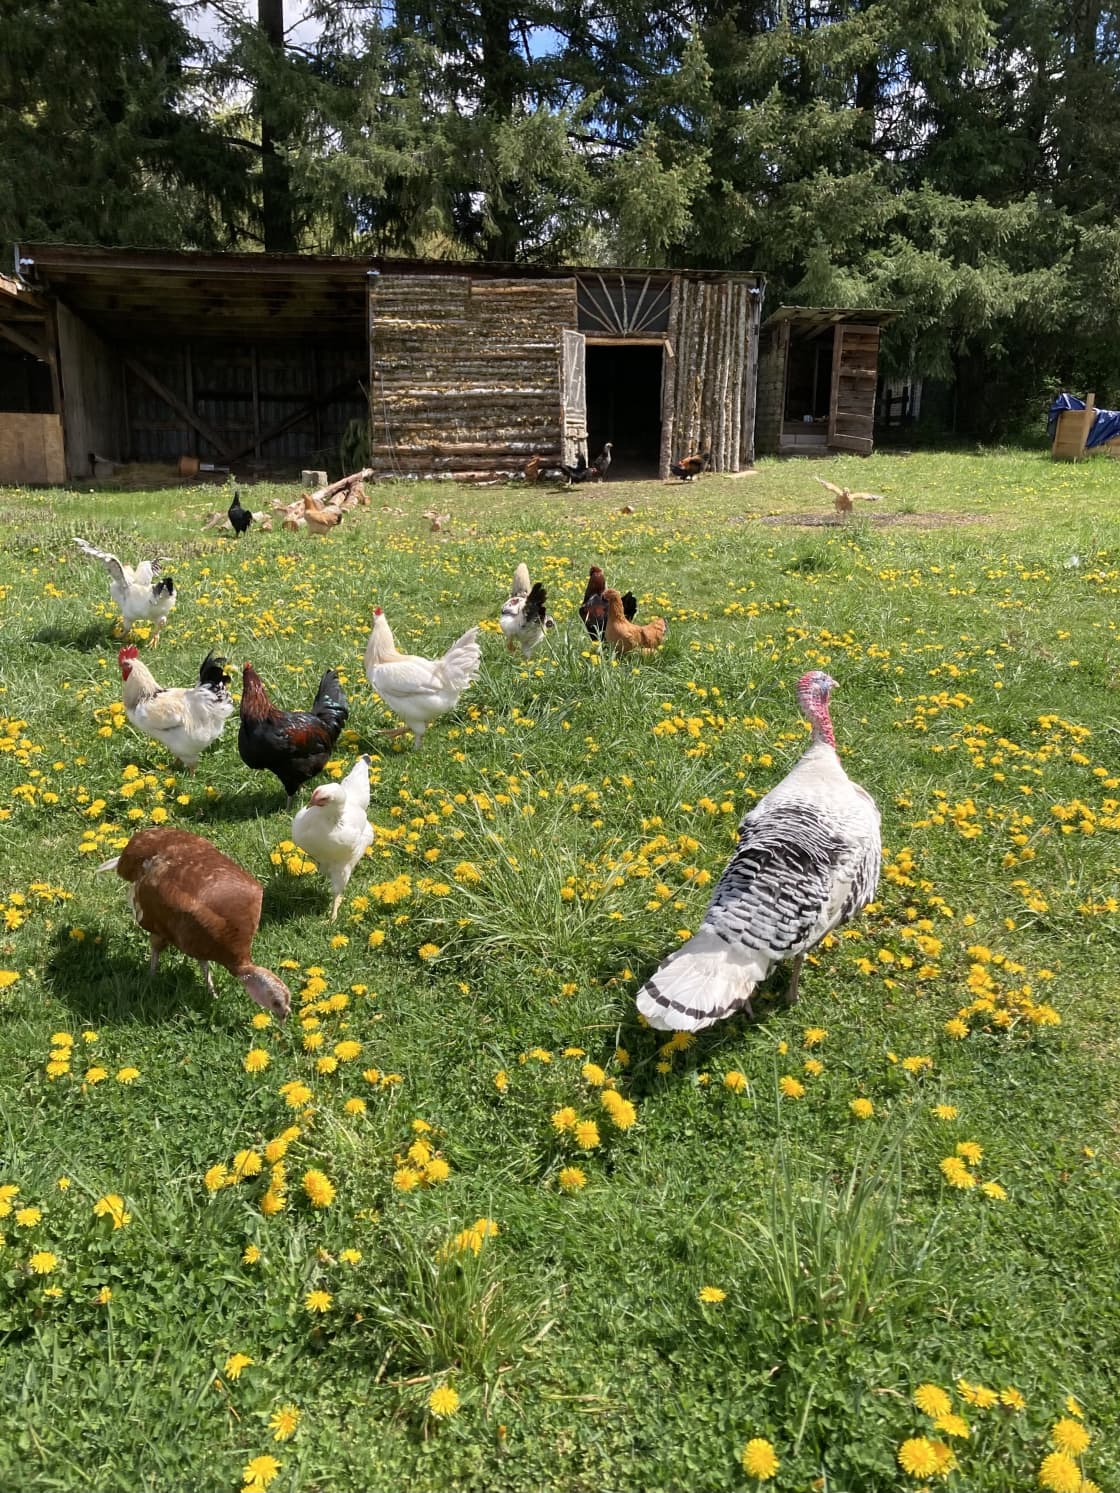 The chickens and turkeys are free ranging about. Make sure to say hello